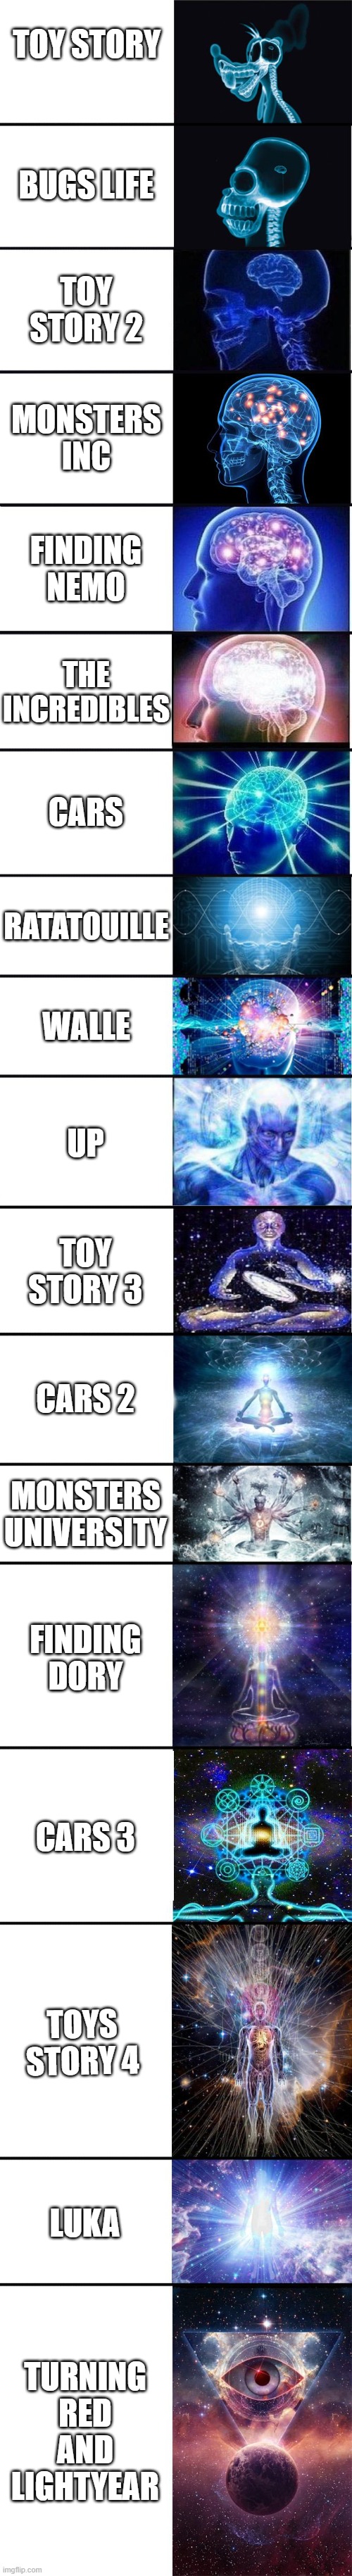 ALL PIXAR MOVIES KINDA | TOY STORY; BUGS LIFE; TOY STORY 2; MONSTERS INC; FINDING NEMO; THE INCREDIBLES; CARS; RATATOUILLE; WALLE; UP; TOY STORY 3; CARS 2; MONSTERS UNIVERSITY; FINDING DORY; CARS 3; TOYS STORY 4; LUKA; TURNING RED AND LIGHTYEAR | image tagged in expanding brain 9001 | made w/ Imgflip meme maker